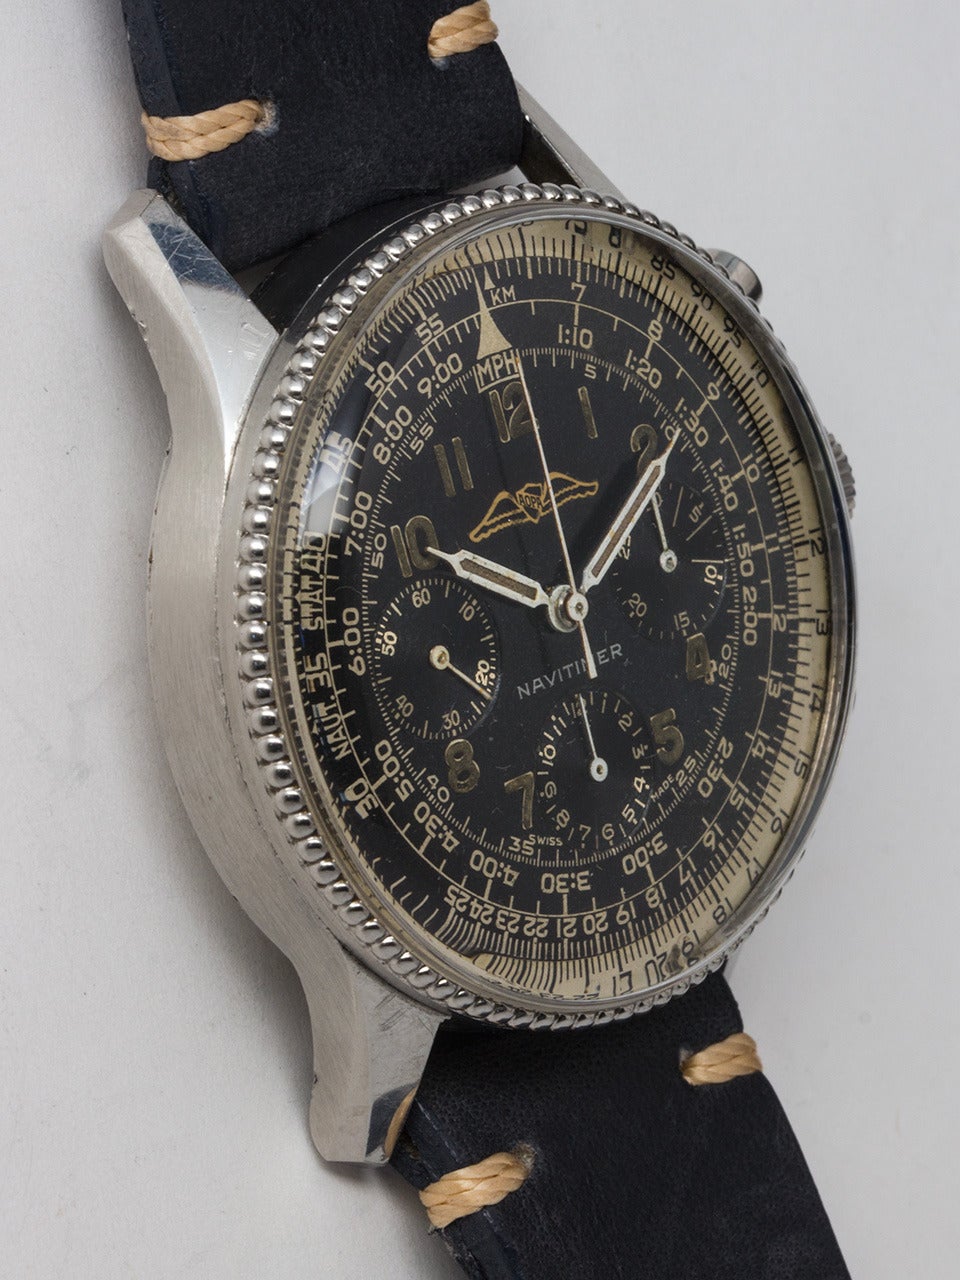 Breitling Stainless Steel Early Navitimer Aviator's Chronograph Wristwatch, Ref. 806, circa 1960s. 40 x 47mm case with acrylic crystal and signed crown. Featuring characteristics that are unique to this early model including a fine beaded bezel, all